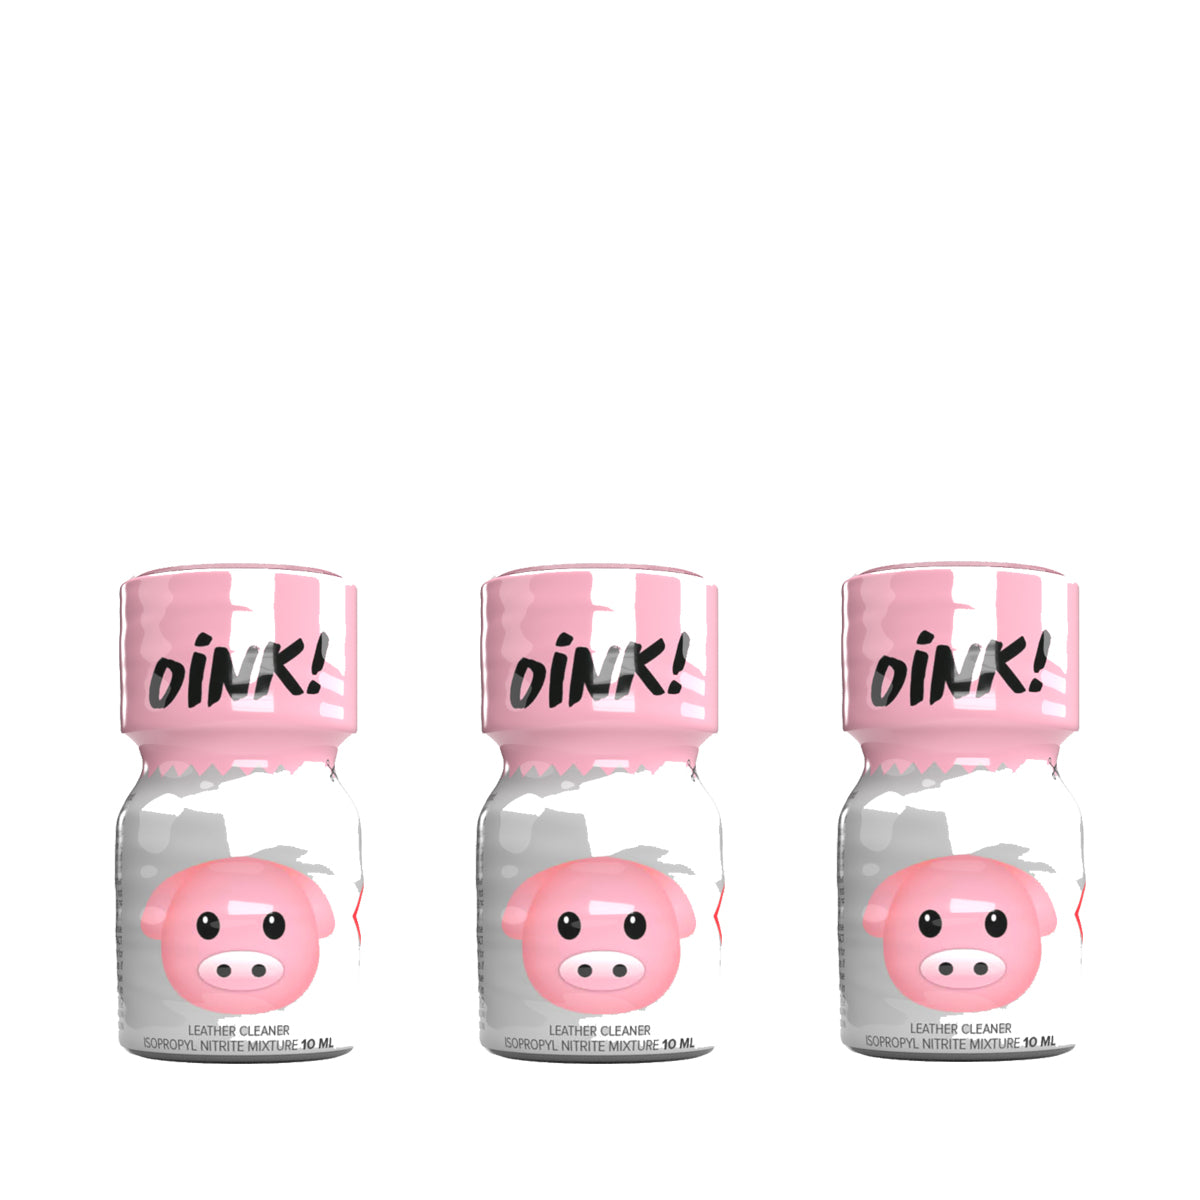 Product photo of 3 bottles of Oink Poppers.